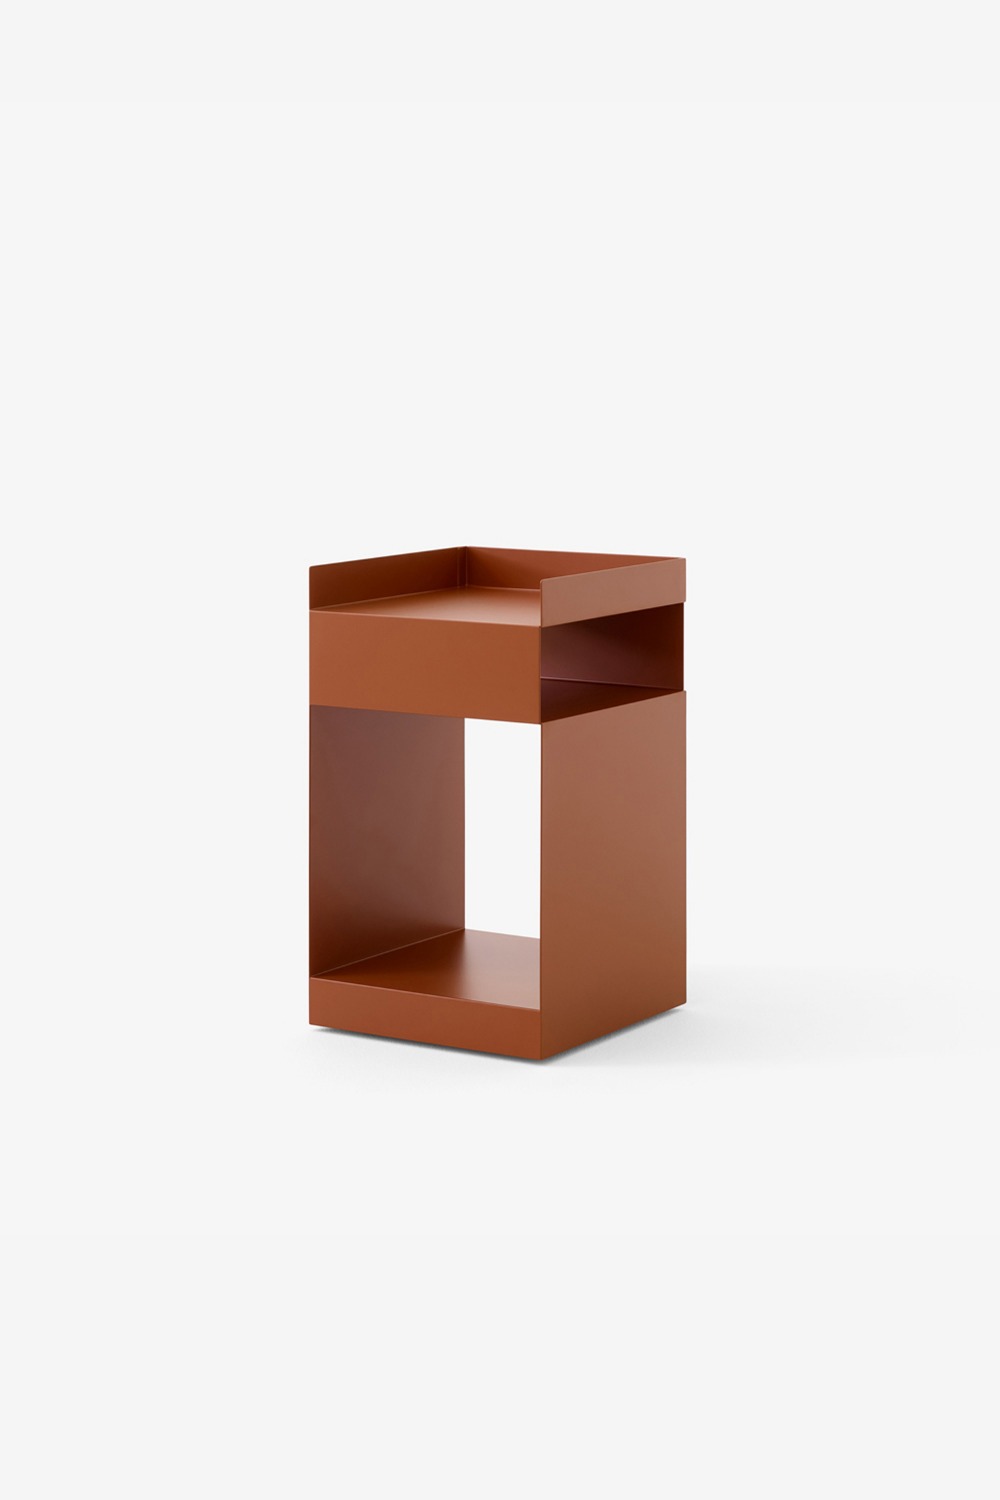 [&amp;Tradition] Rotate Table /SC73 (Terracotta)